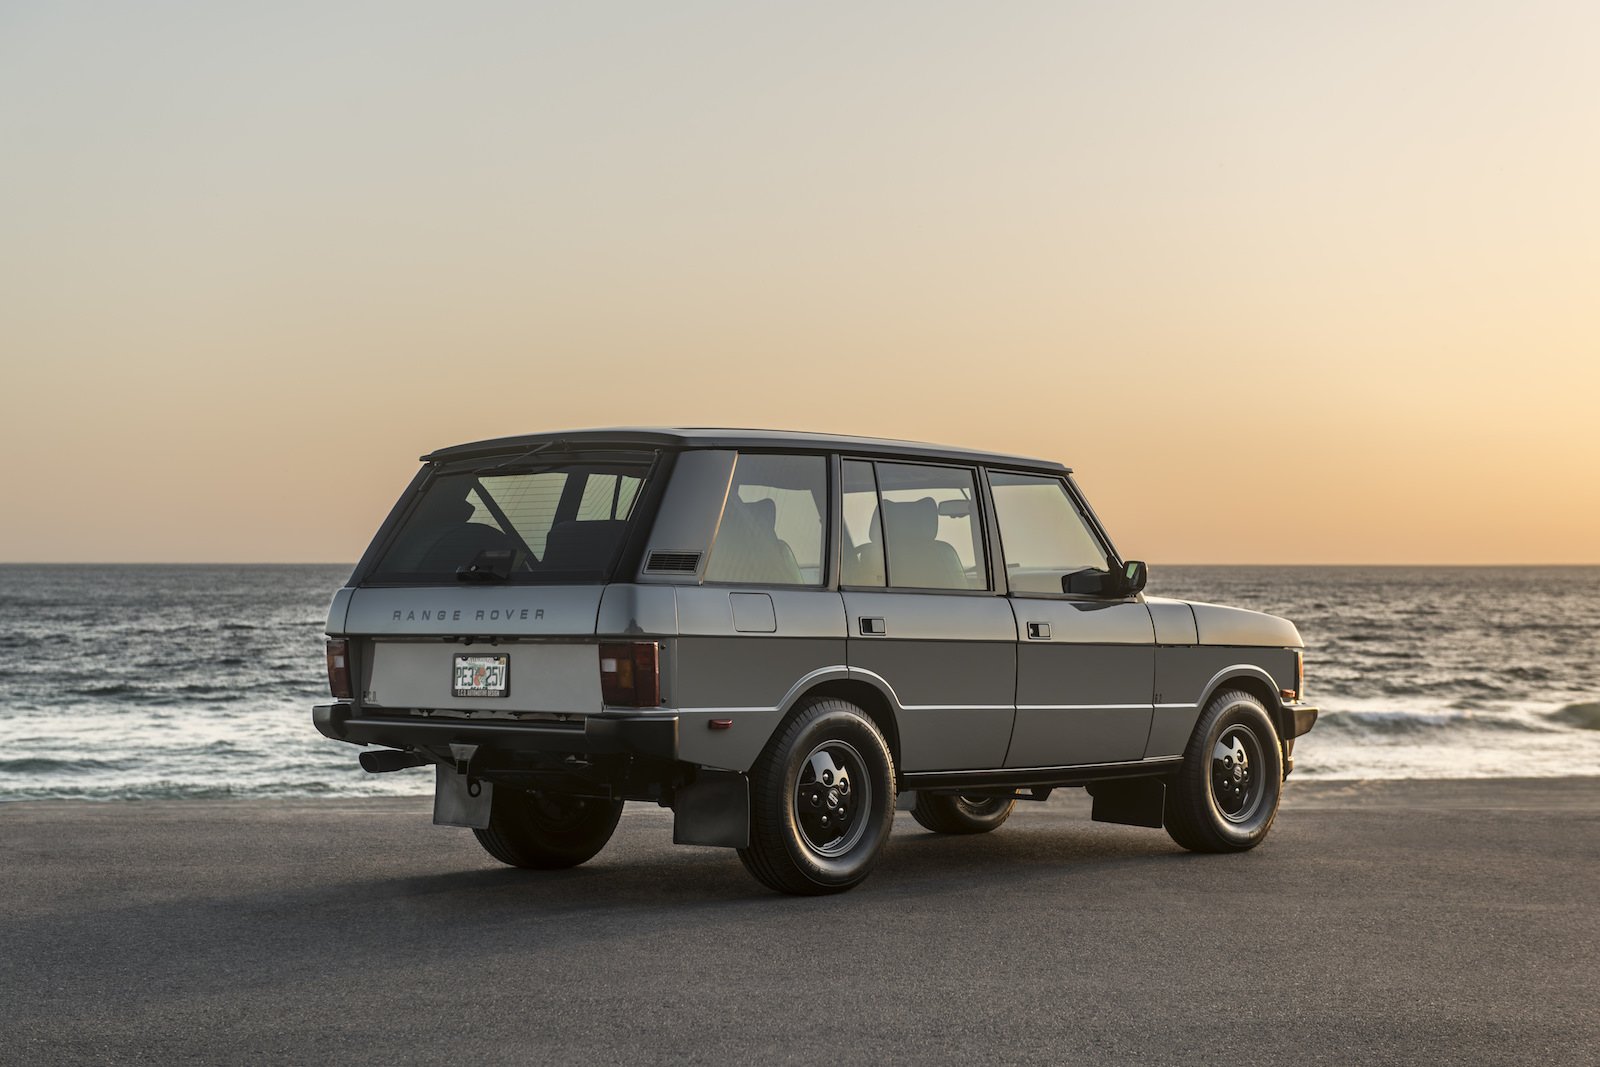 A 430 Hp Corvette Engined Range Rover Classic